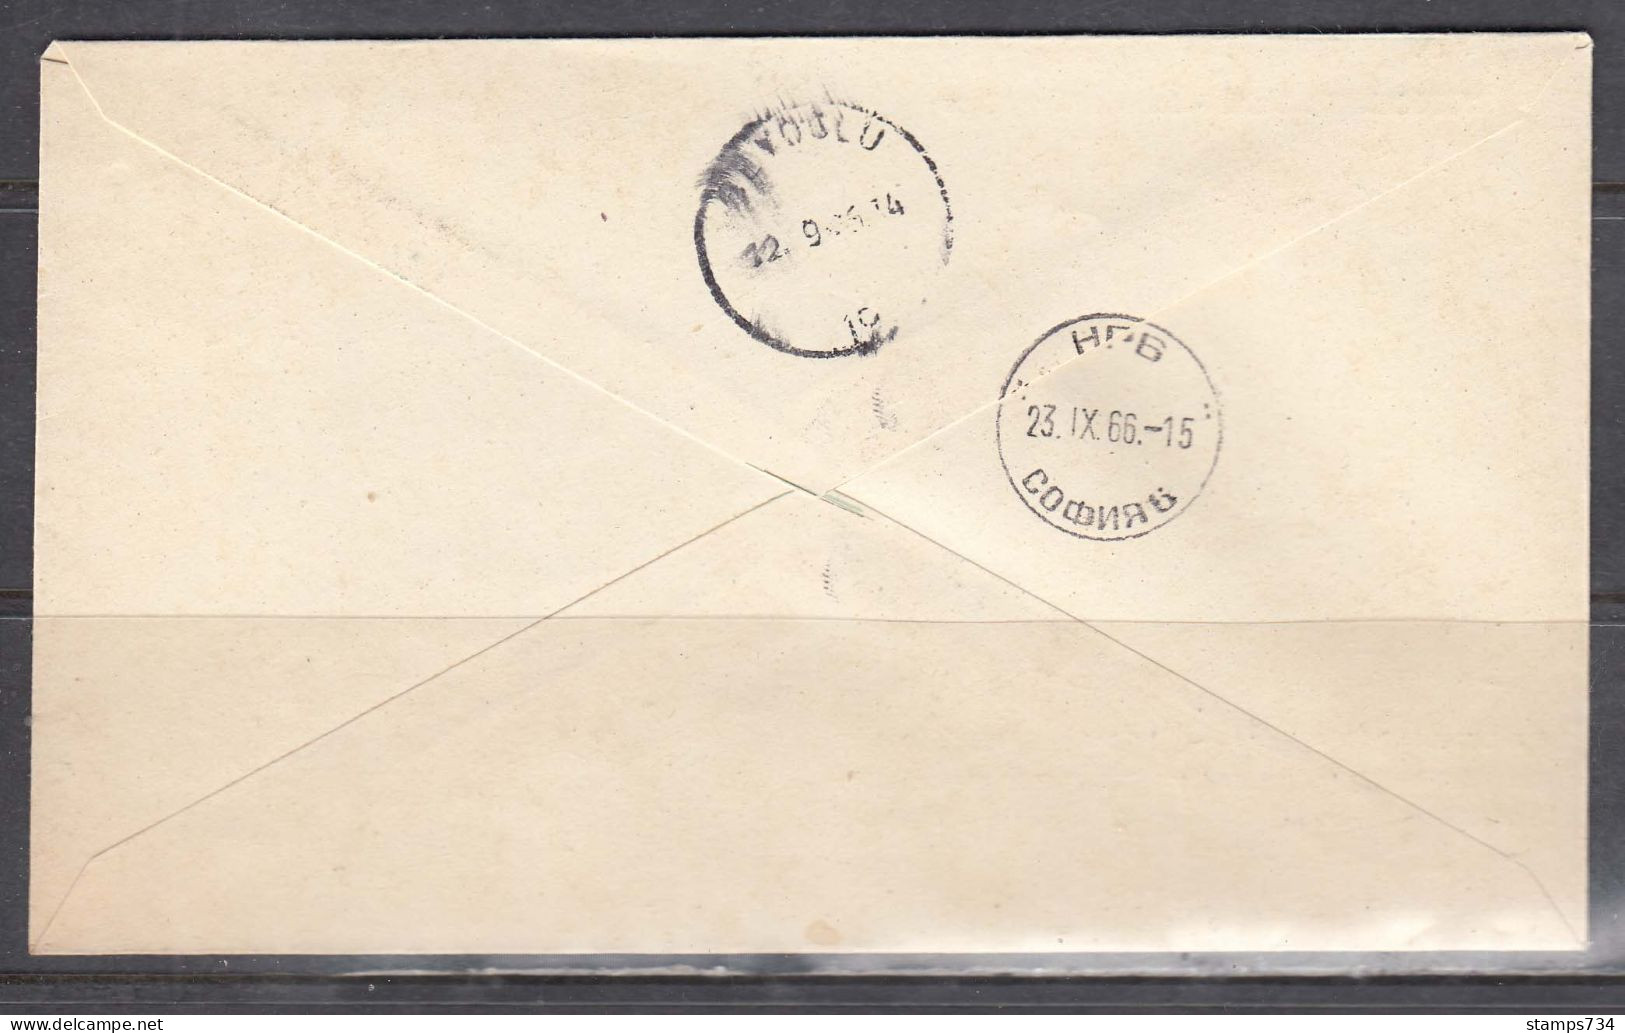 Turkey 1966/4 - Stamp Exhibition BALKANFILA II, Day Of Yugoslavia, Letter With Spec. Cancelation, Travel To Sofia - Lettres & Documents